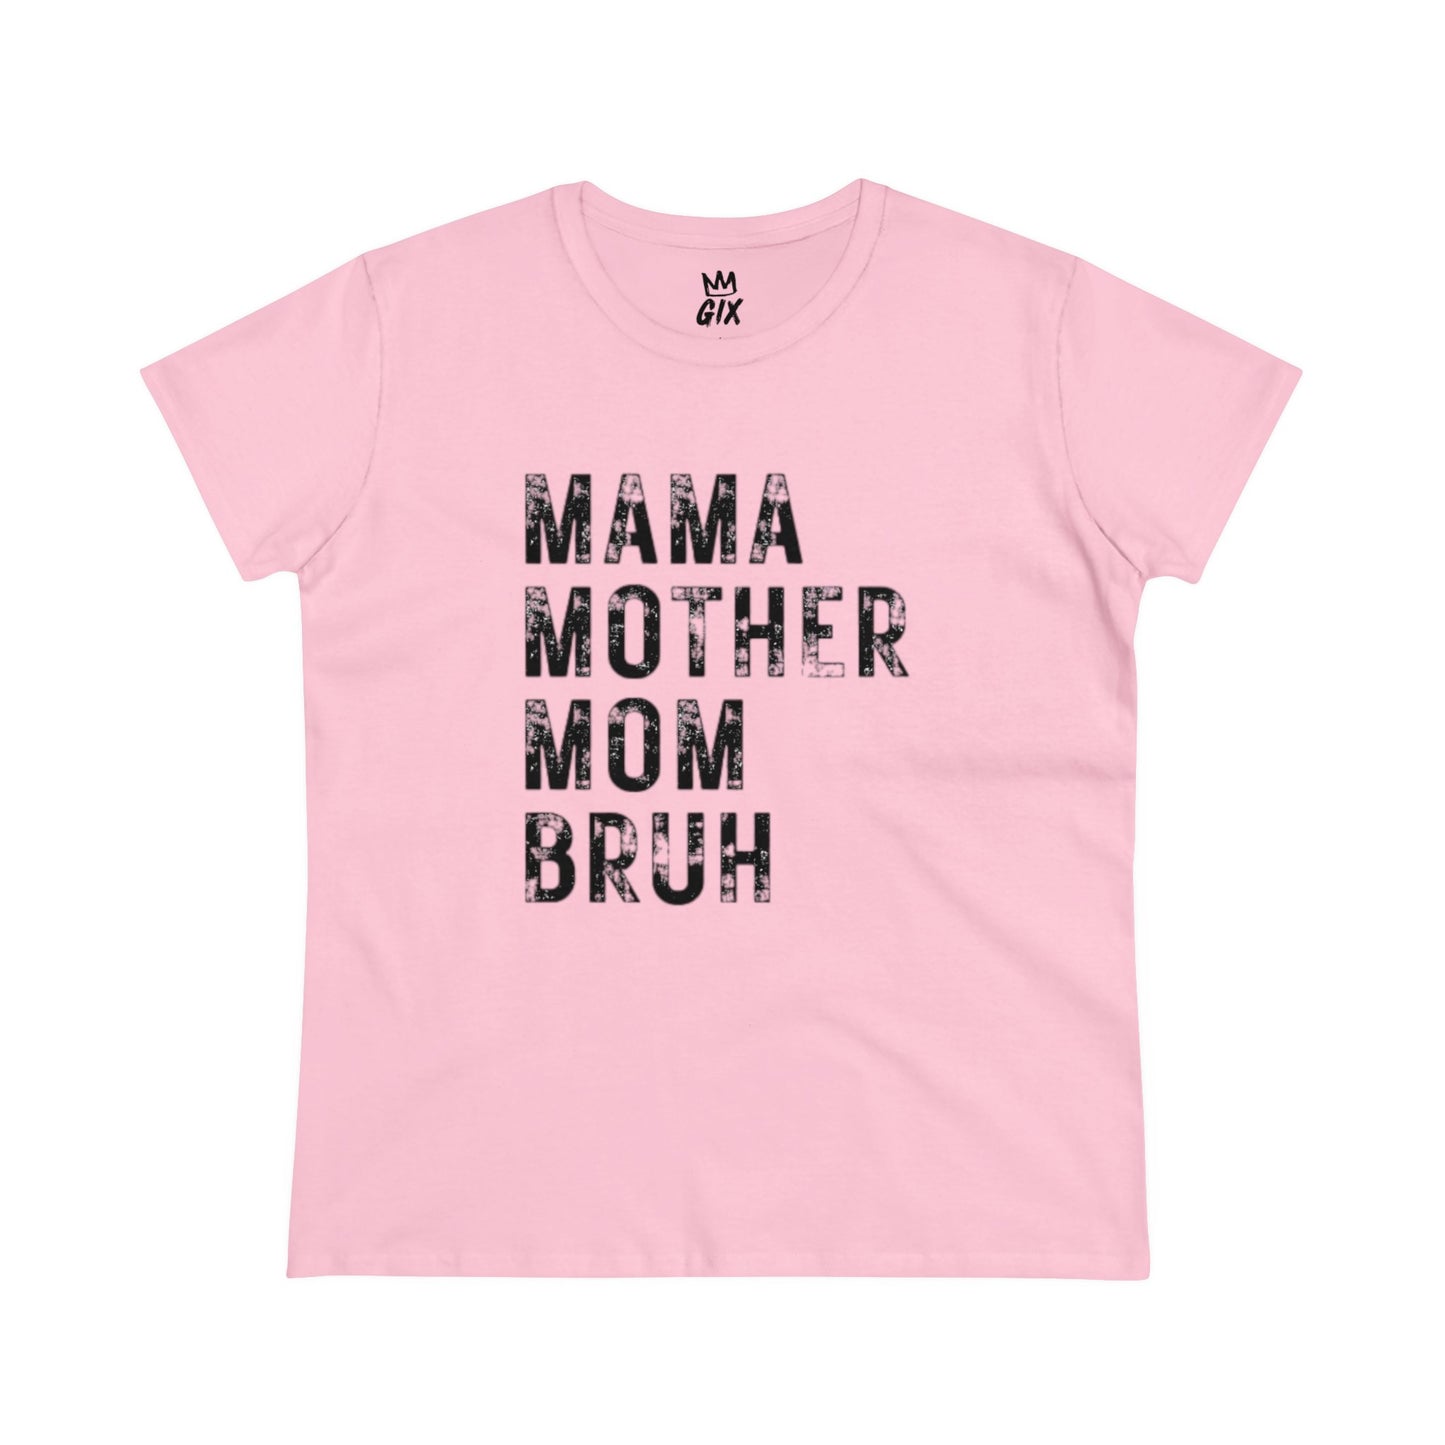 Mom, Mama, Mother, Bruh T-Shirt - Comfy Cotton Tee for Everyday Mom Life